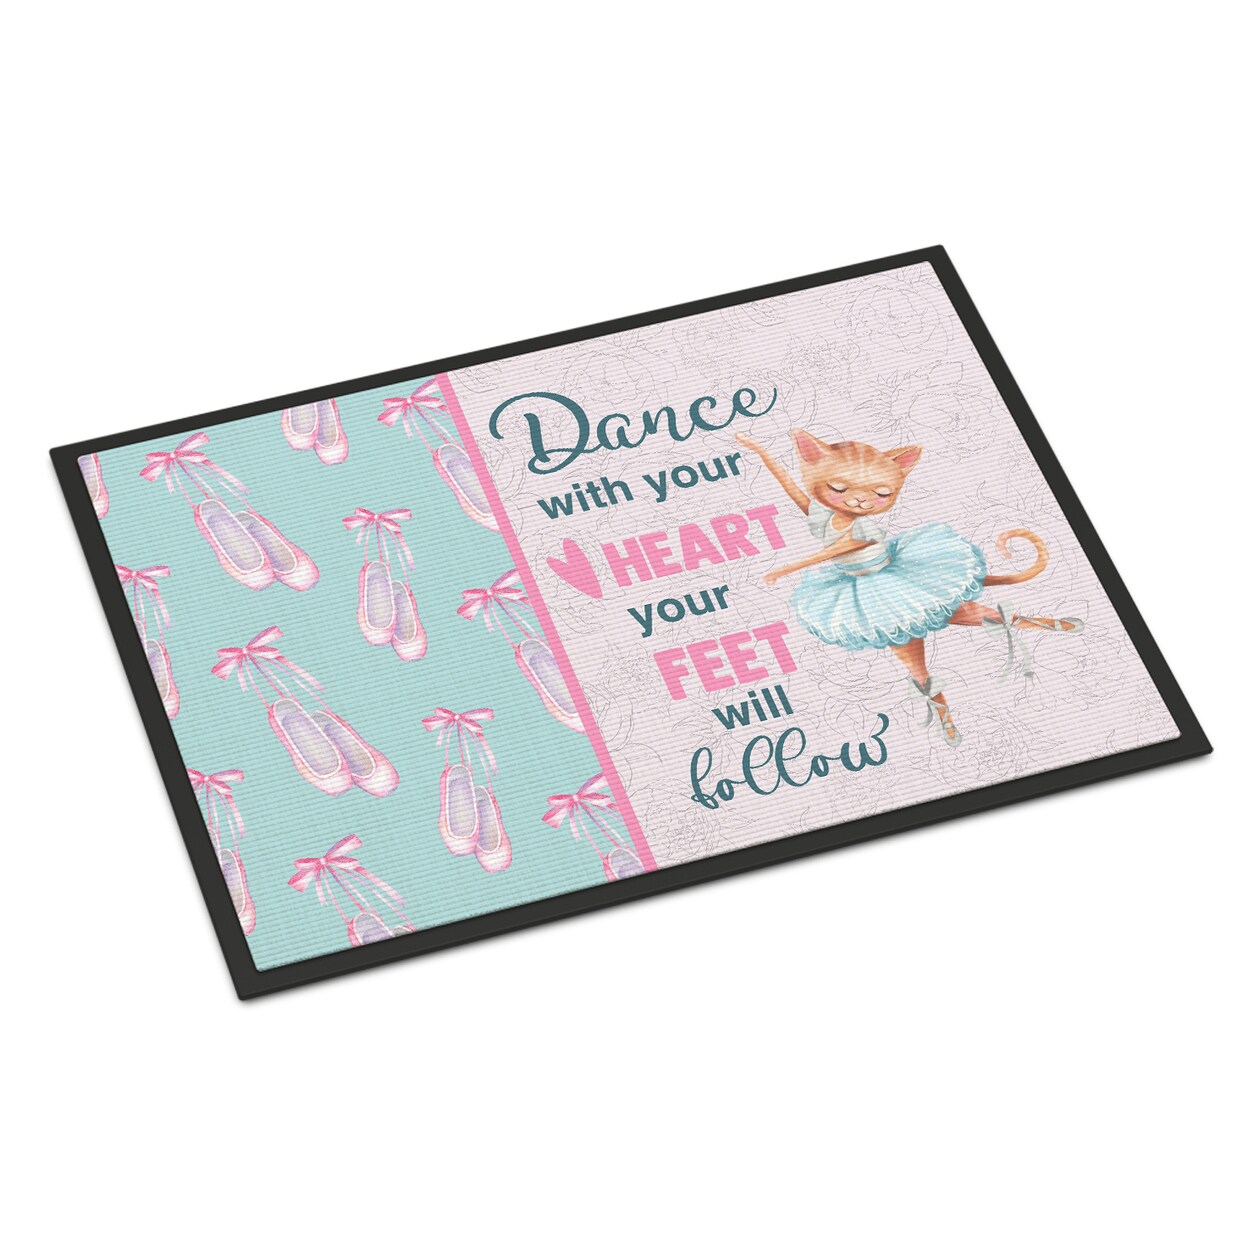 Caroline&#x27;s Treasures Dance with your heart and your feet will follow Indoor or Outdoor Mat 18x27